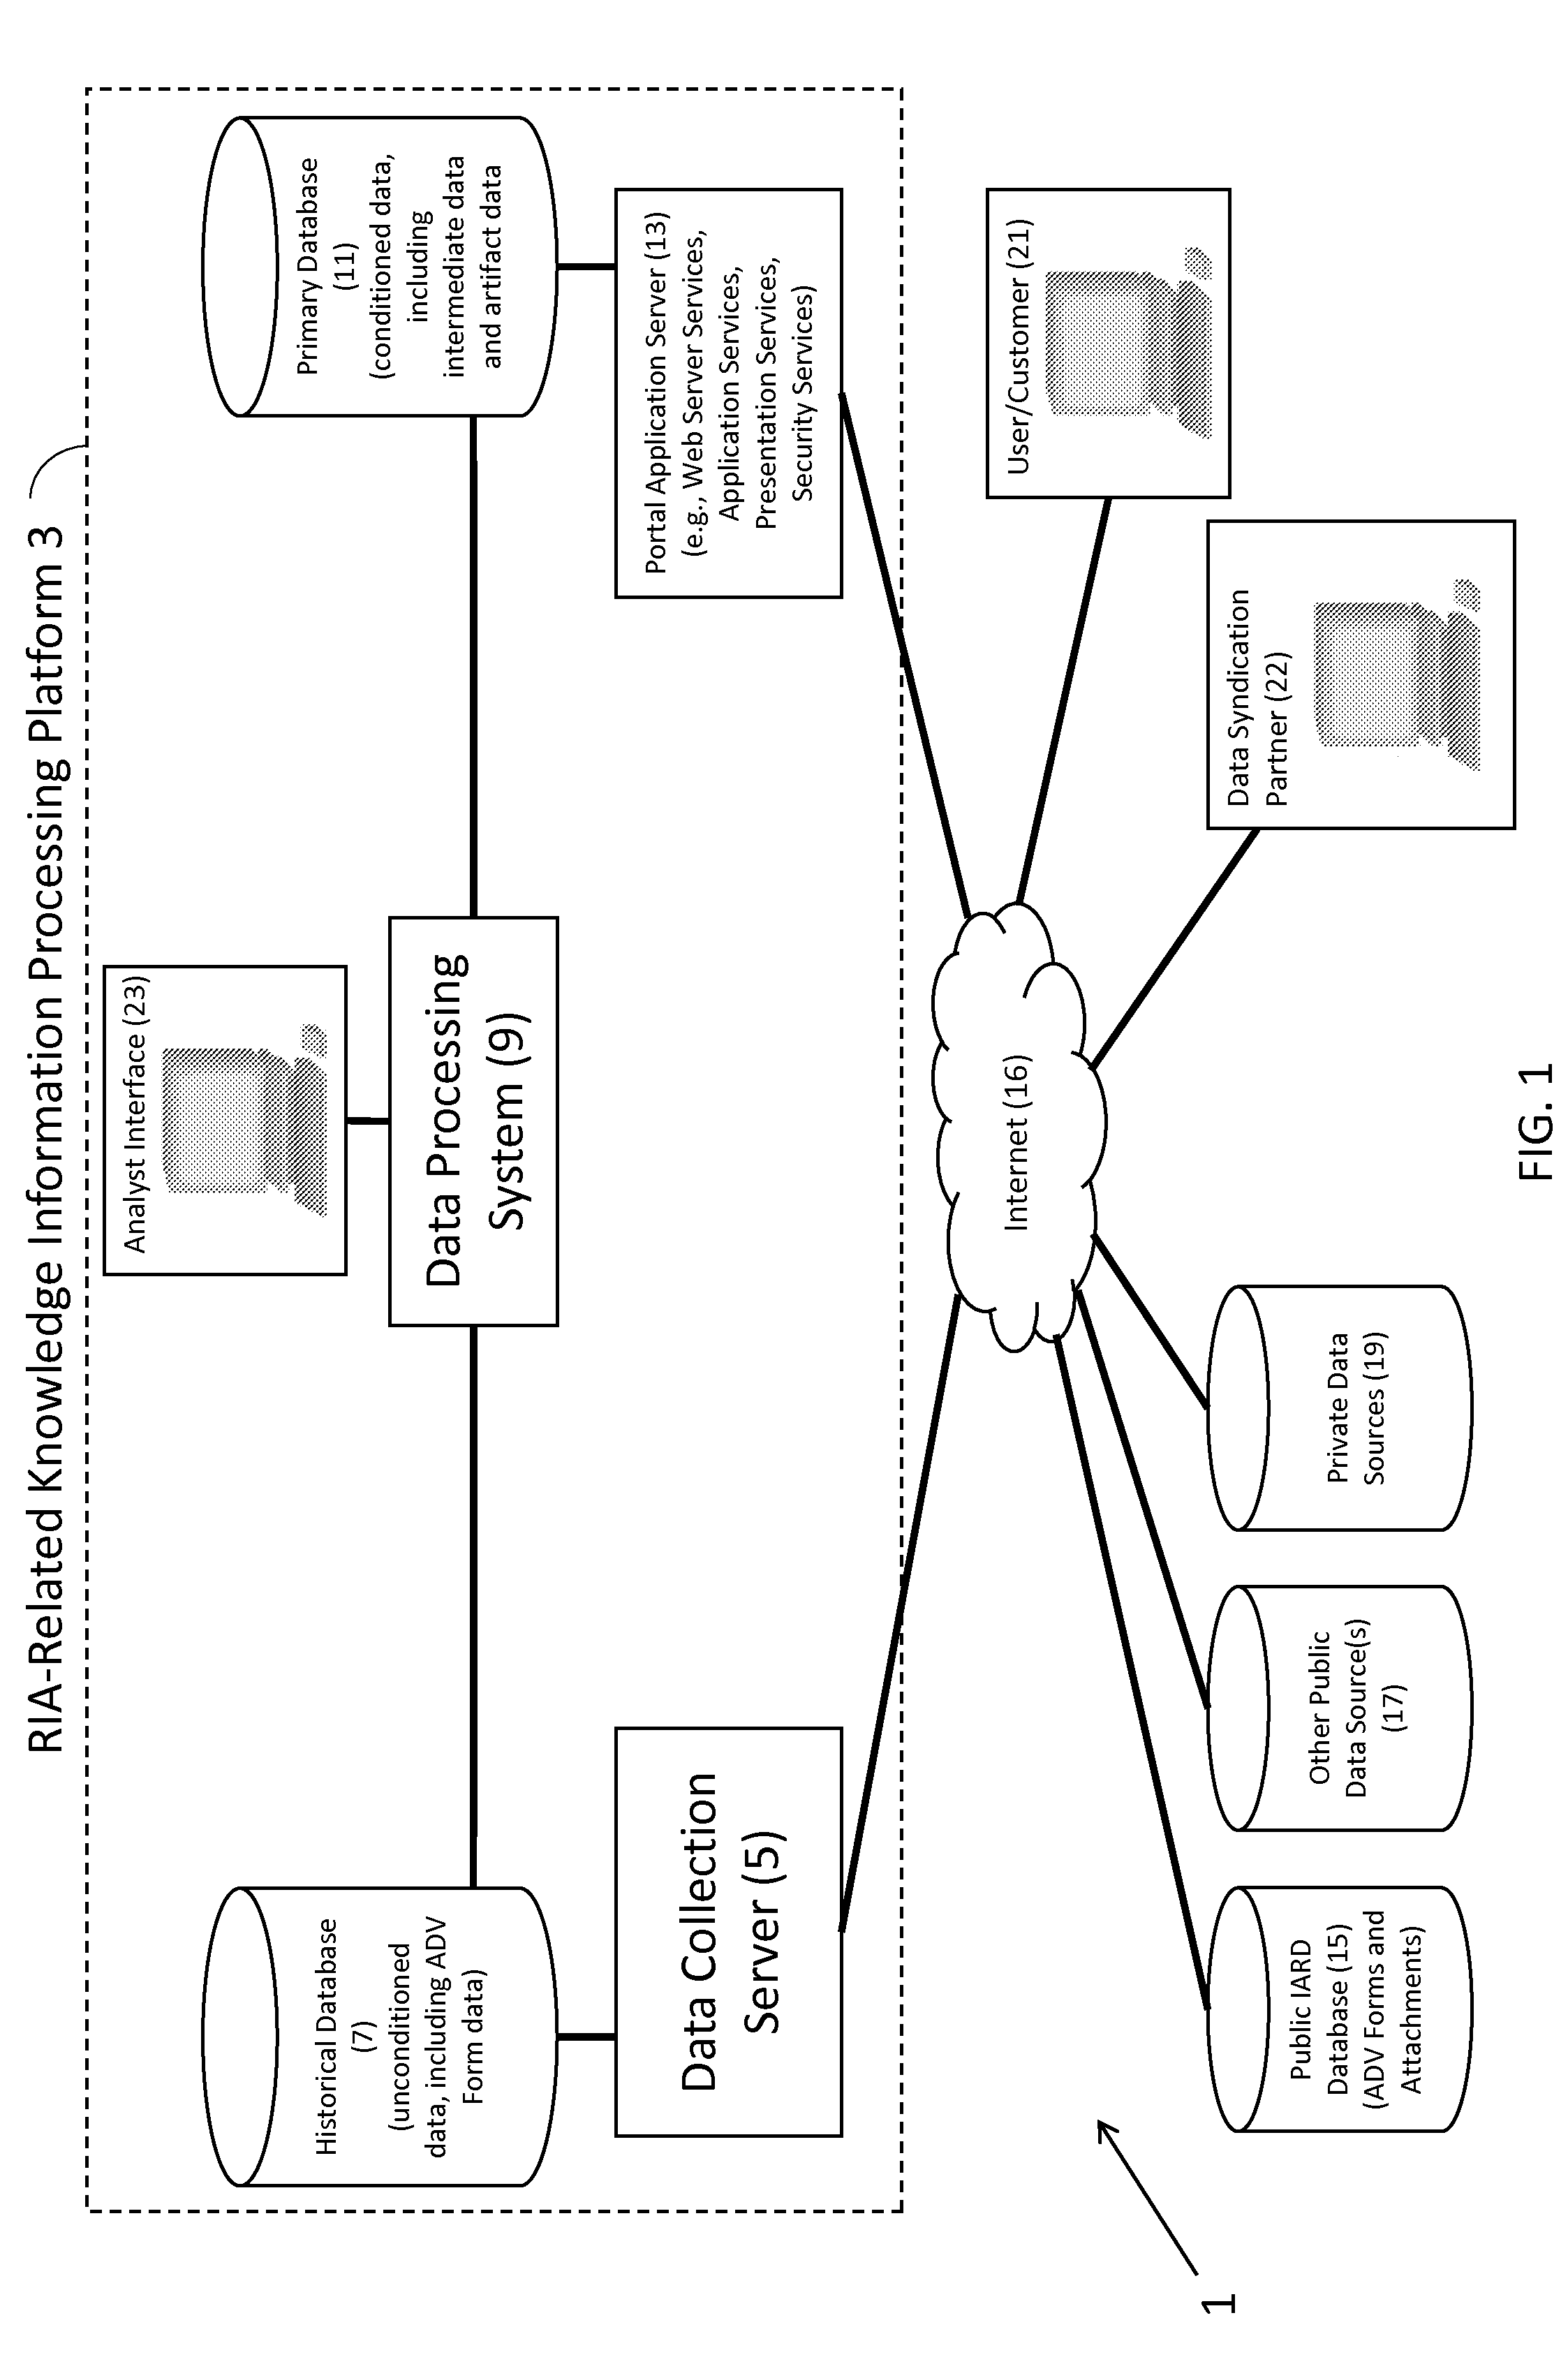 Data Processing System and Method for Deriving and Publishing Knowledge of Registered Investment Advisors and Related Entities and People